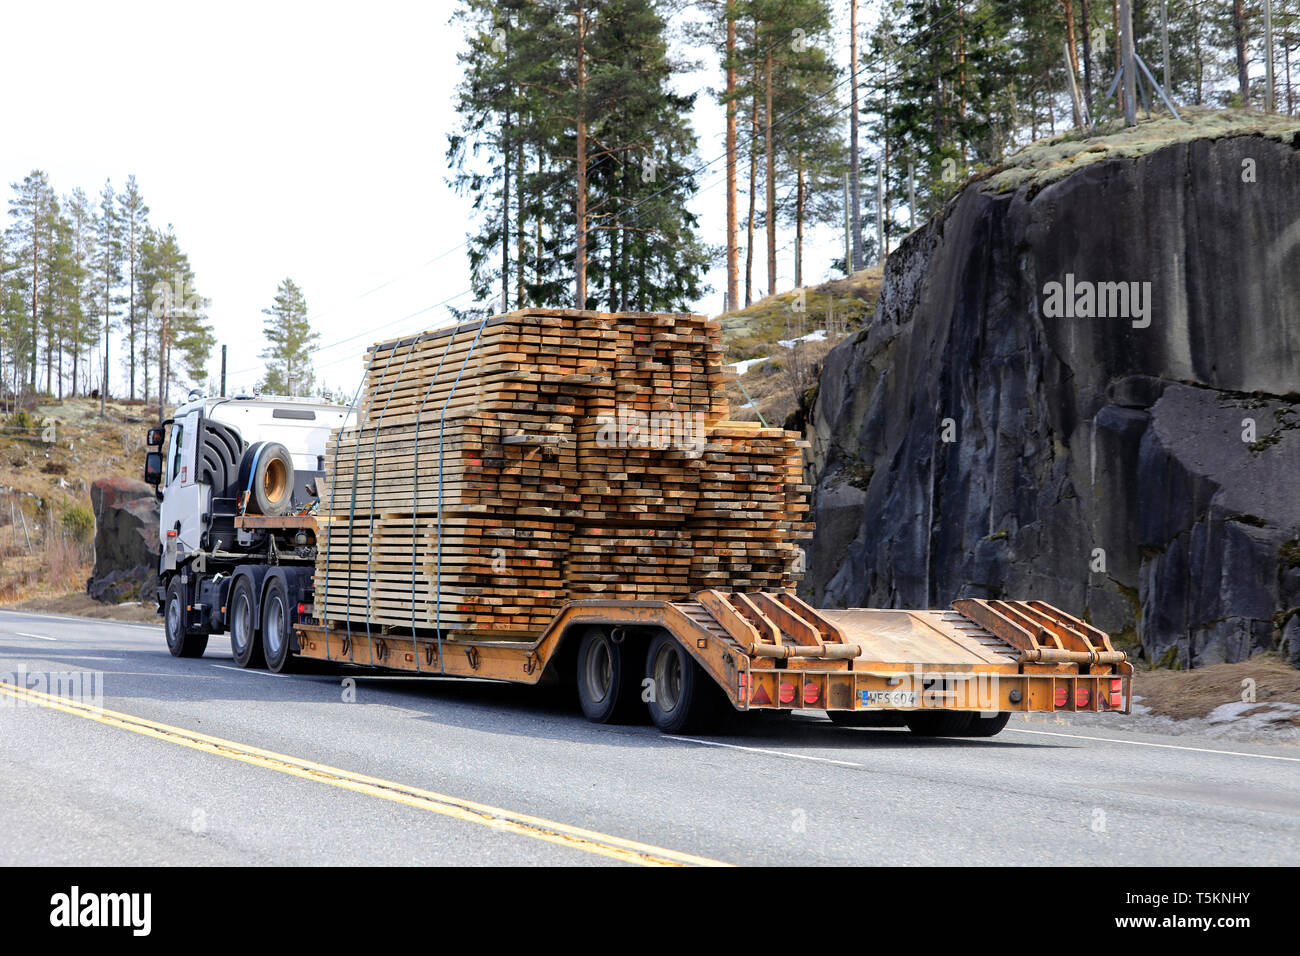 Salo, Finland - April 19, 2019: Truck pulls a heavy load of lumber on gooseneck trailer along highway on a day of spring, rear view. Stock Photo